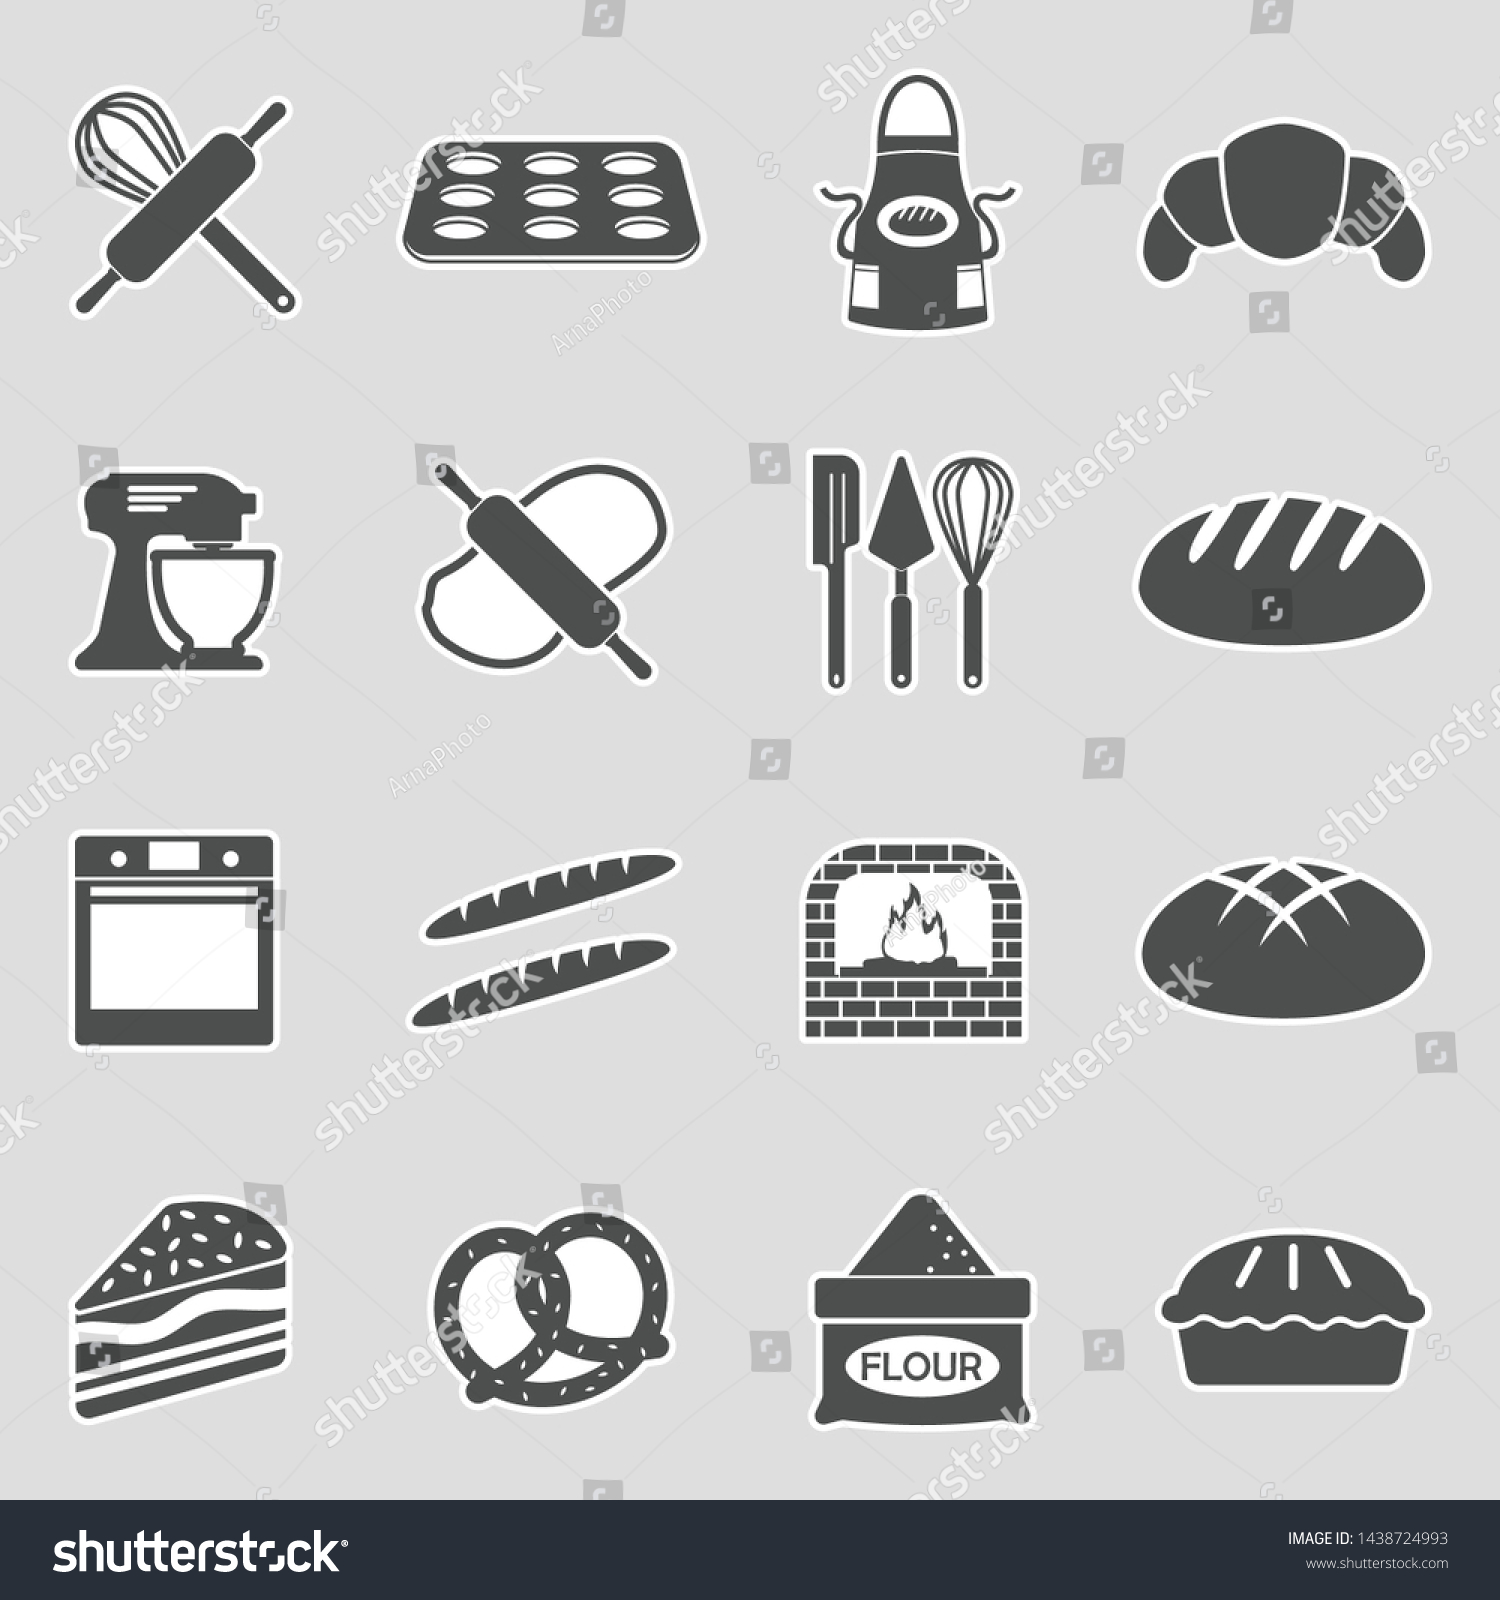 SVG of Bakery And Pastry Icons. Sticker Design. Vector Illustration. svg